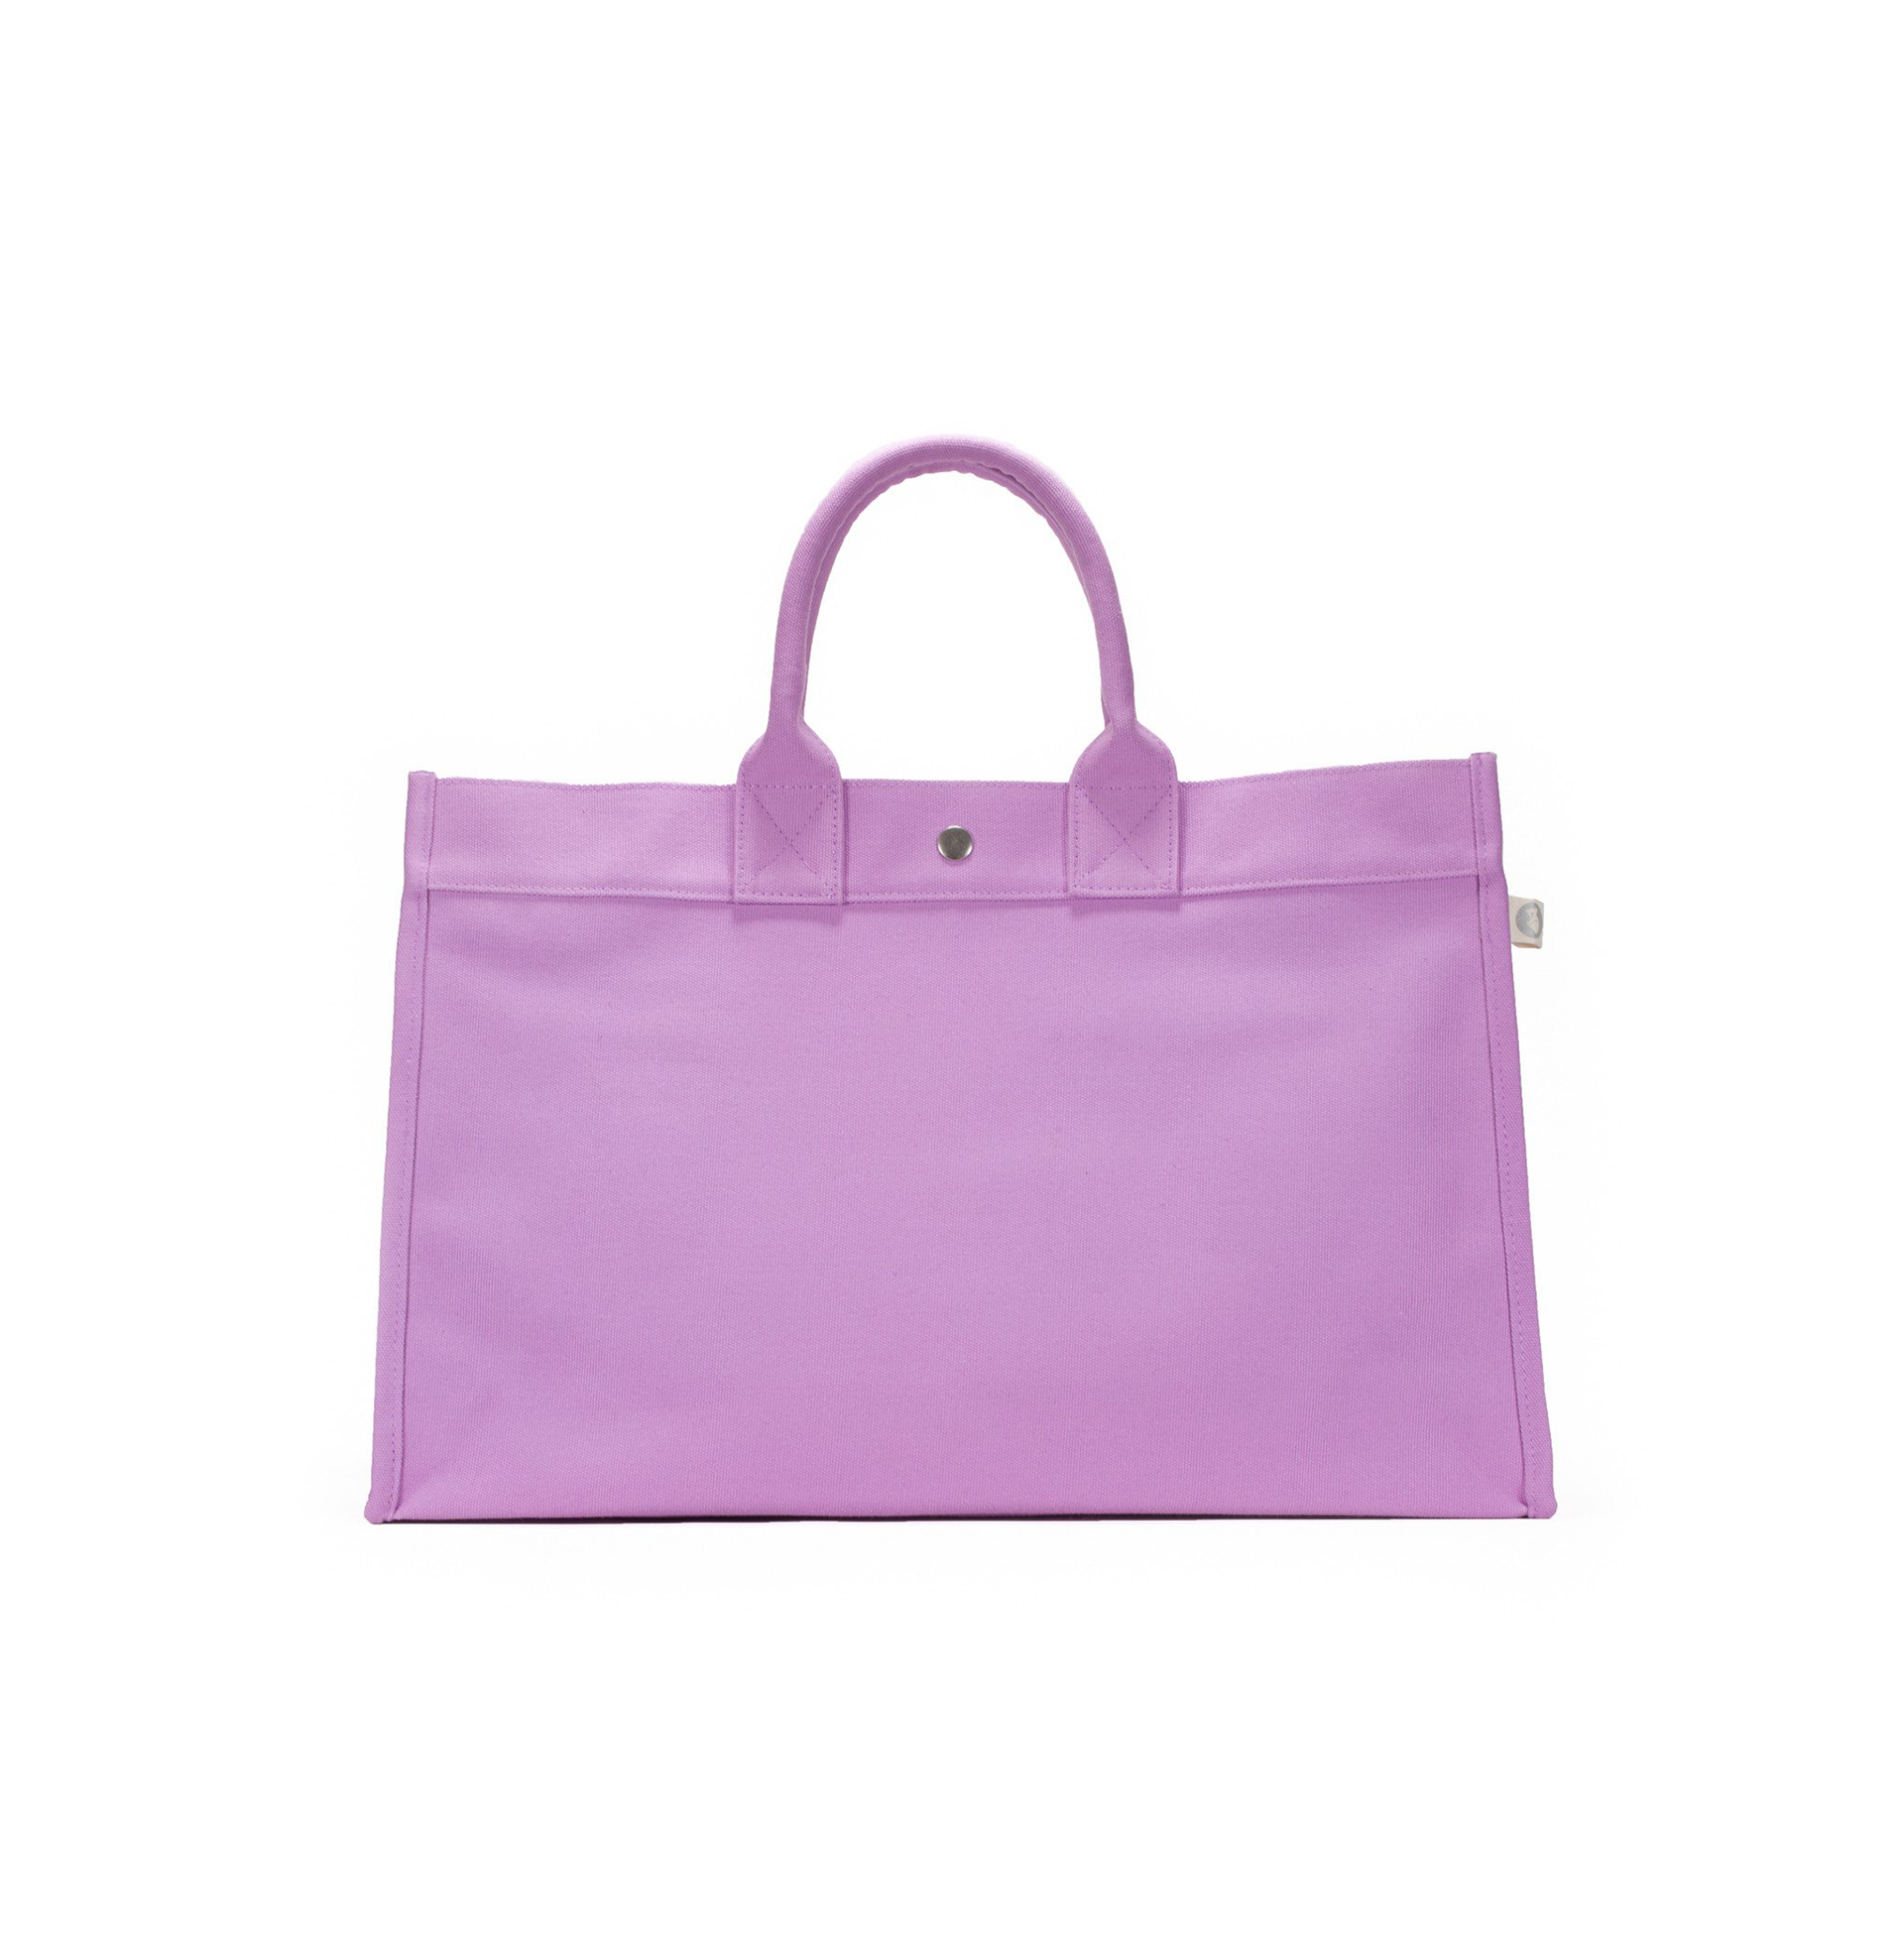 East-West Bag: Lavender Just $75.60 with code PREFALL - Quilted Koala